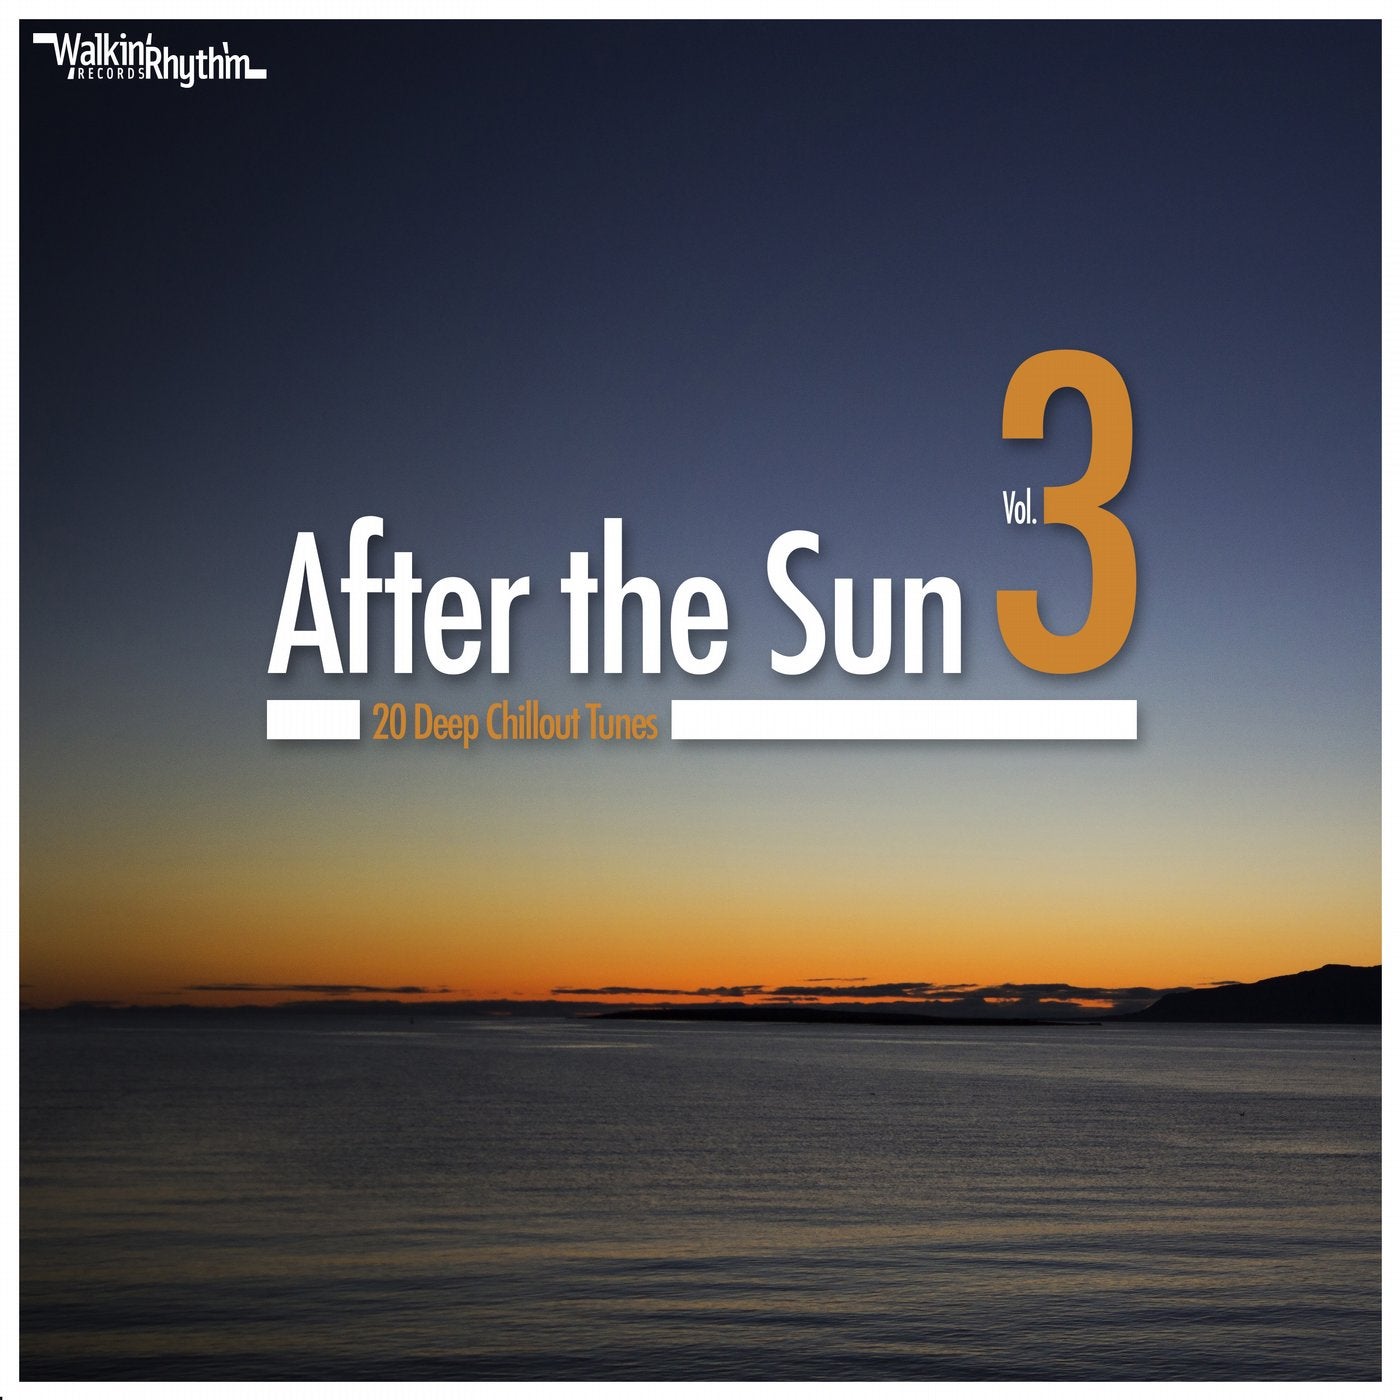 After the Sun, Vol. 3